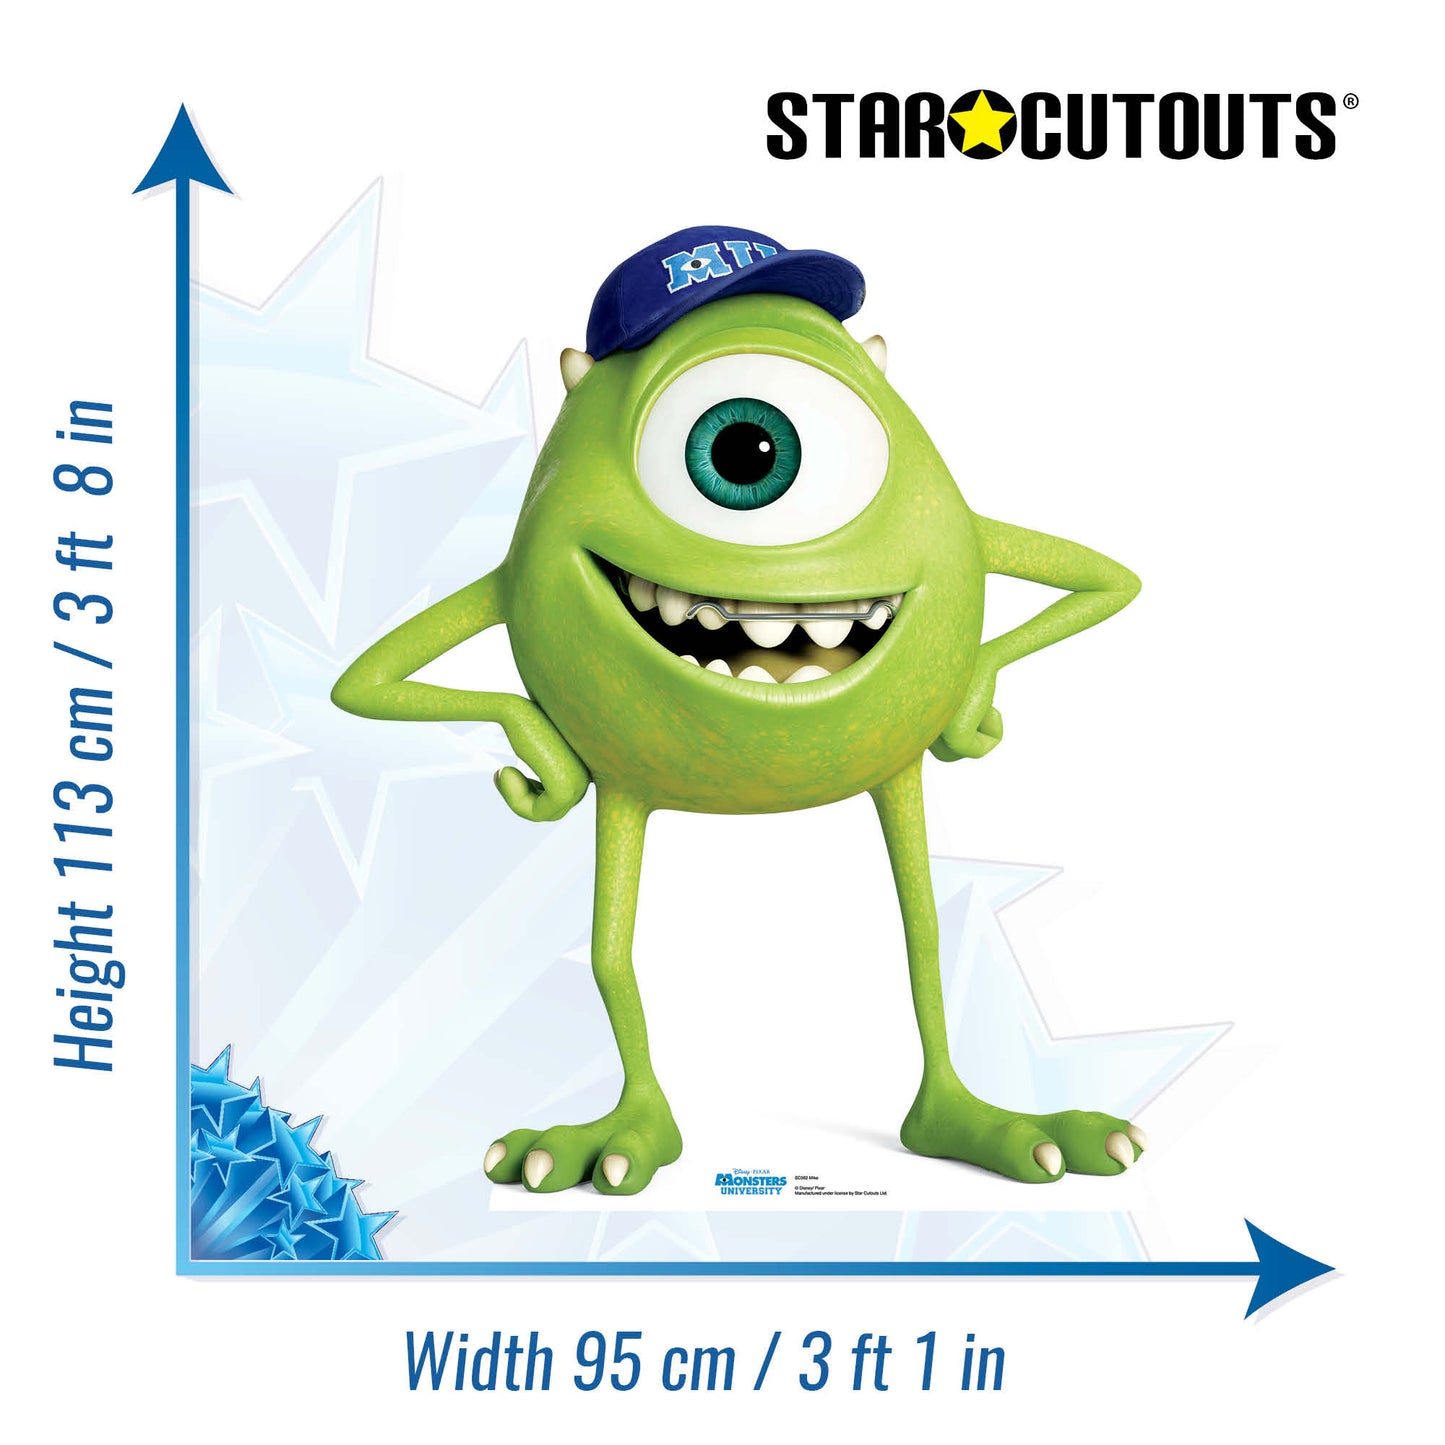 Mike Monster's University Cardboard Cut Out Height 113cm